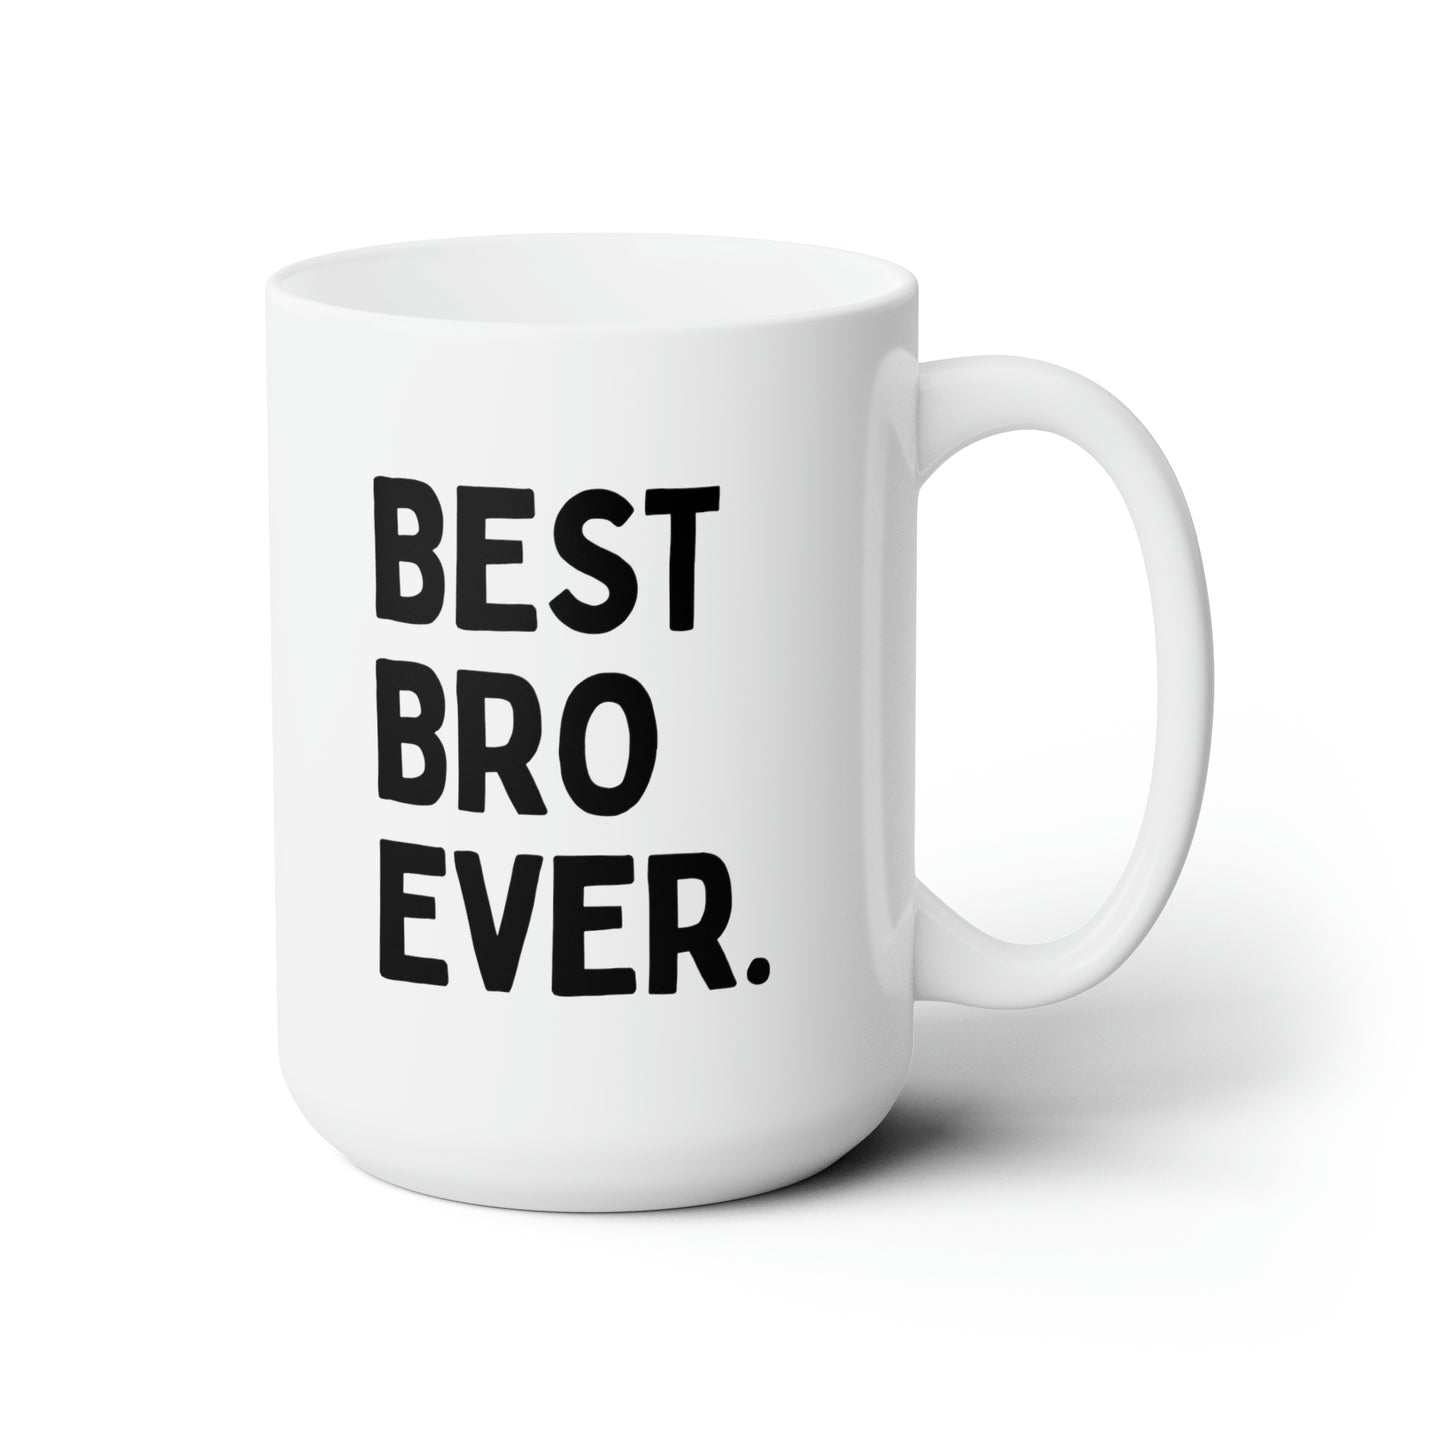 Best Bro Ever 15oz white funny large coffee mug gift for brother best friend husband men fathers day bff dad waveywares wavey wares wavywares wavy wares